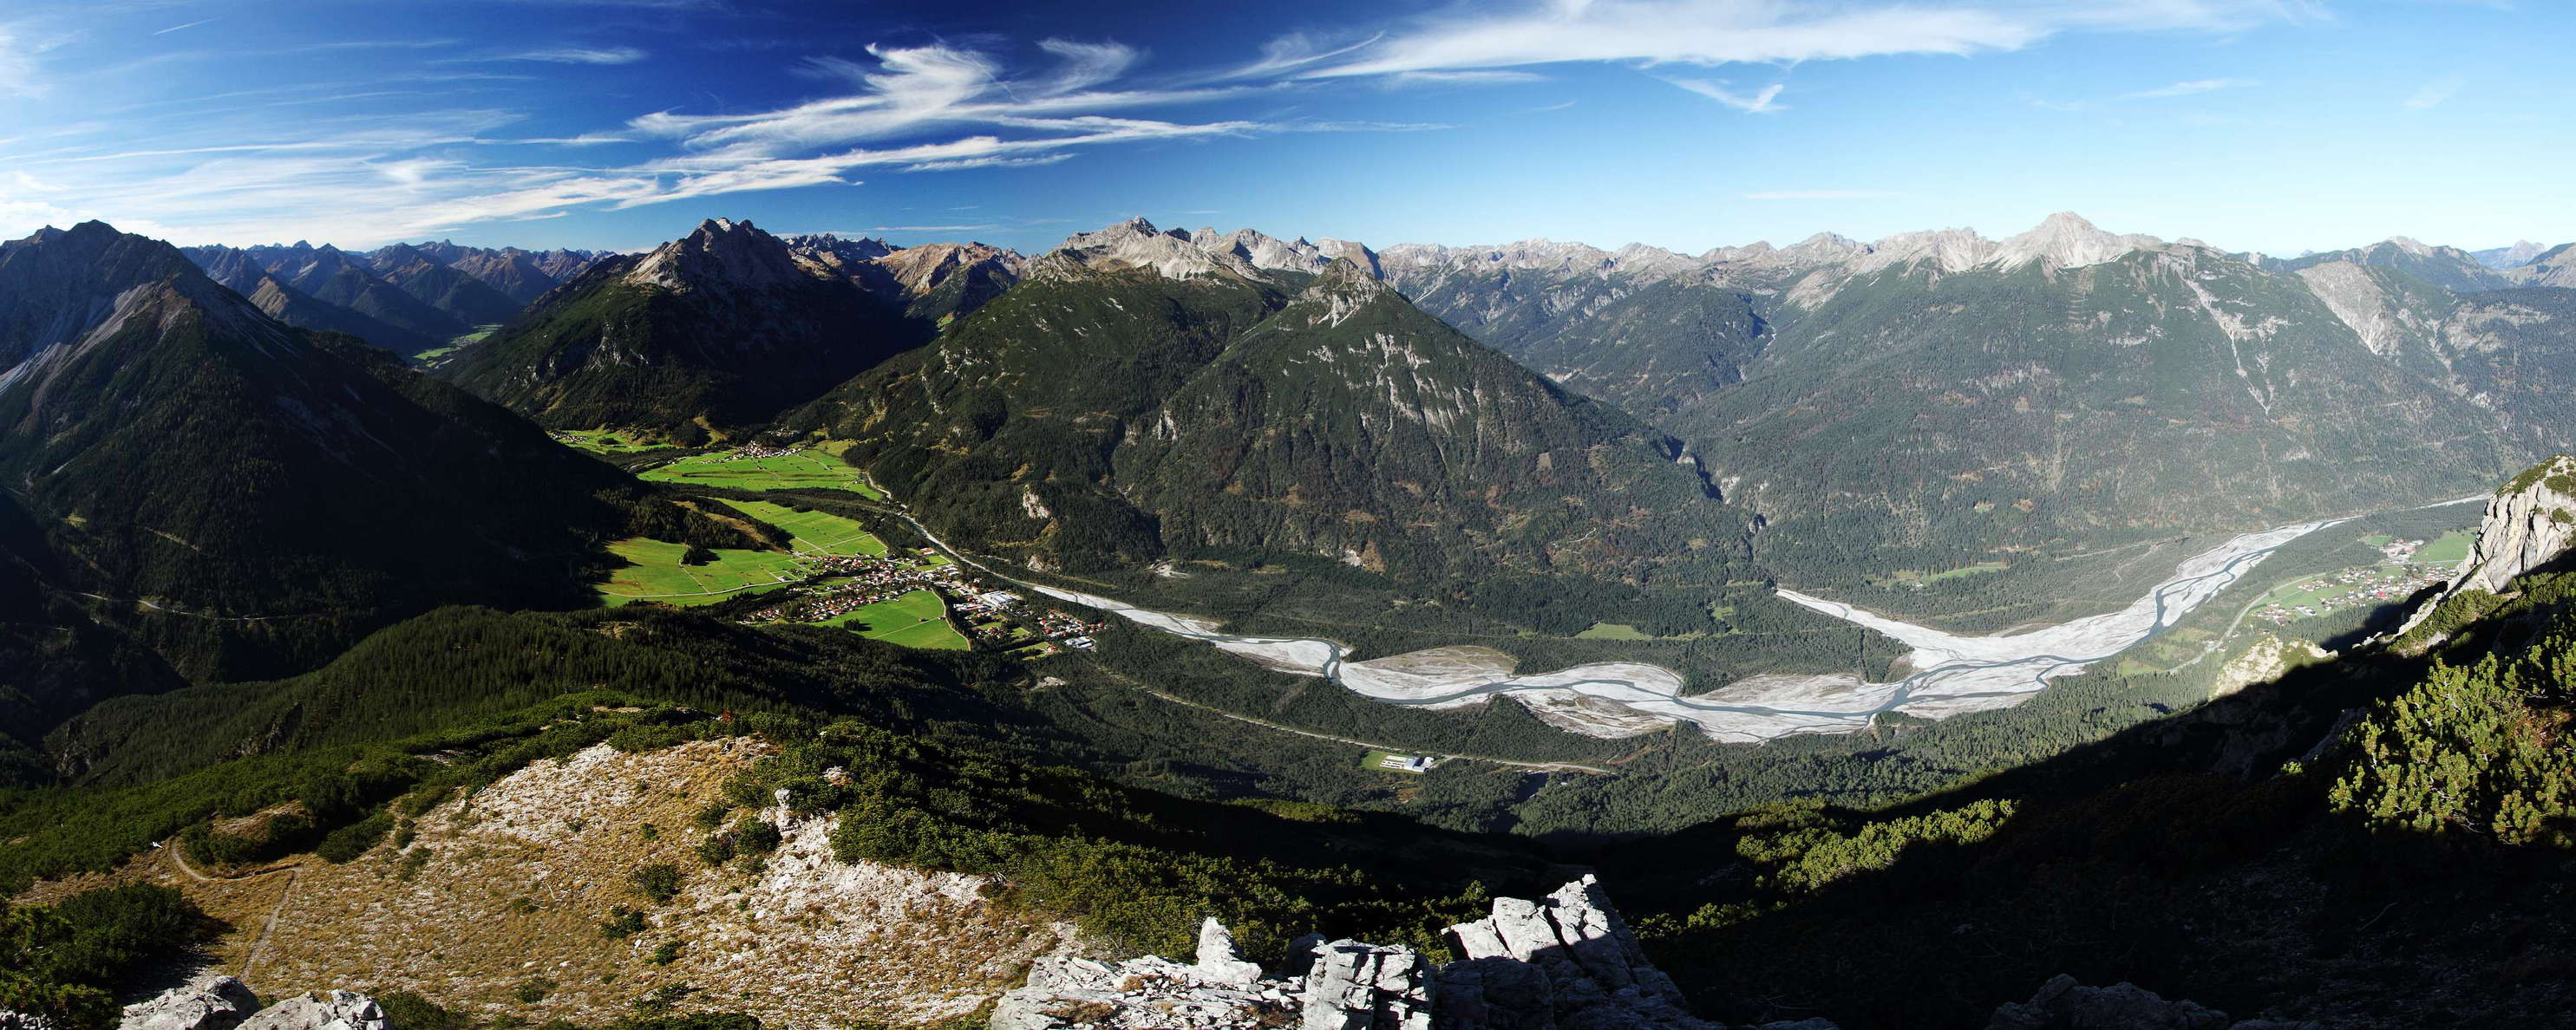 Lechtal Valley panorama with braided river